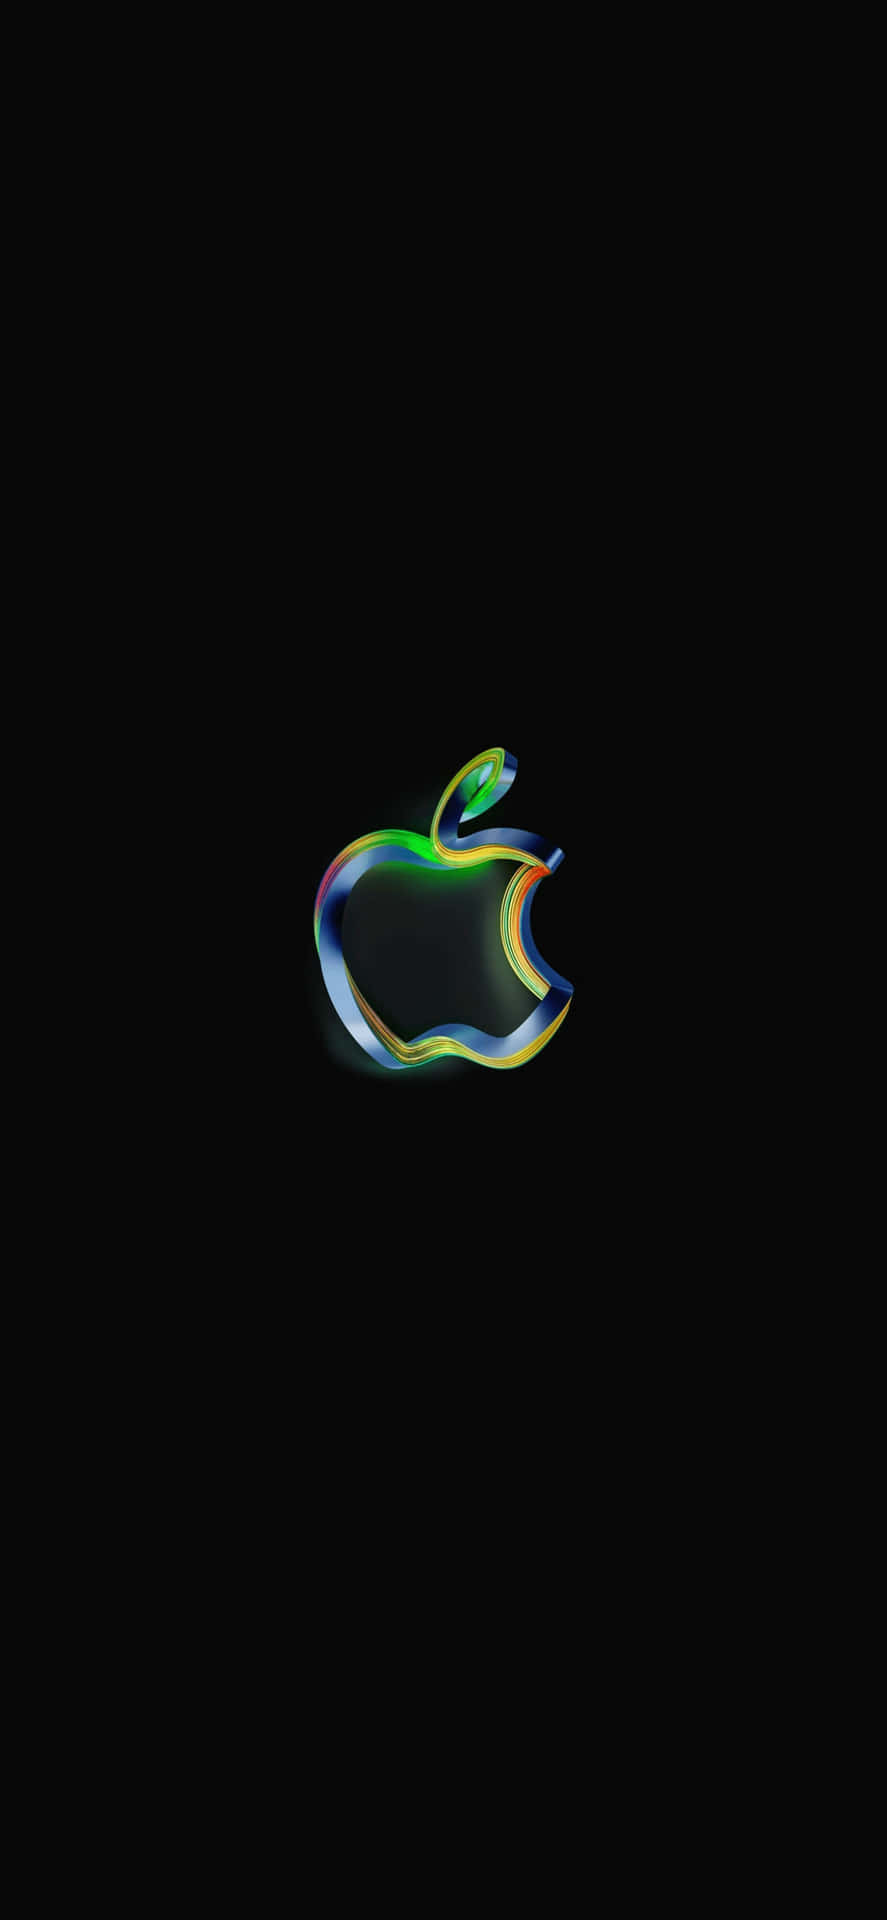 Logo of the iPhone X from Apple Inc Wallpaper